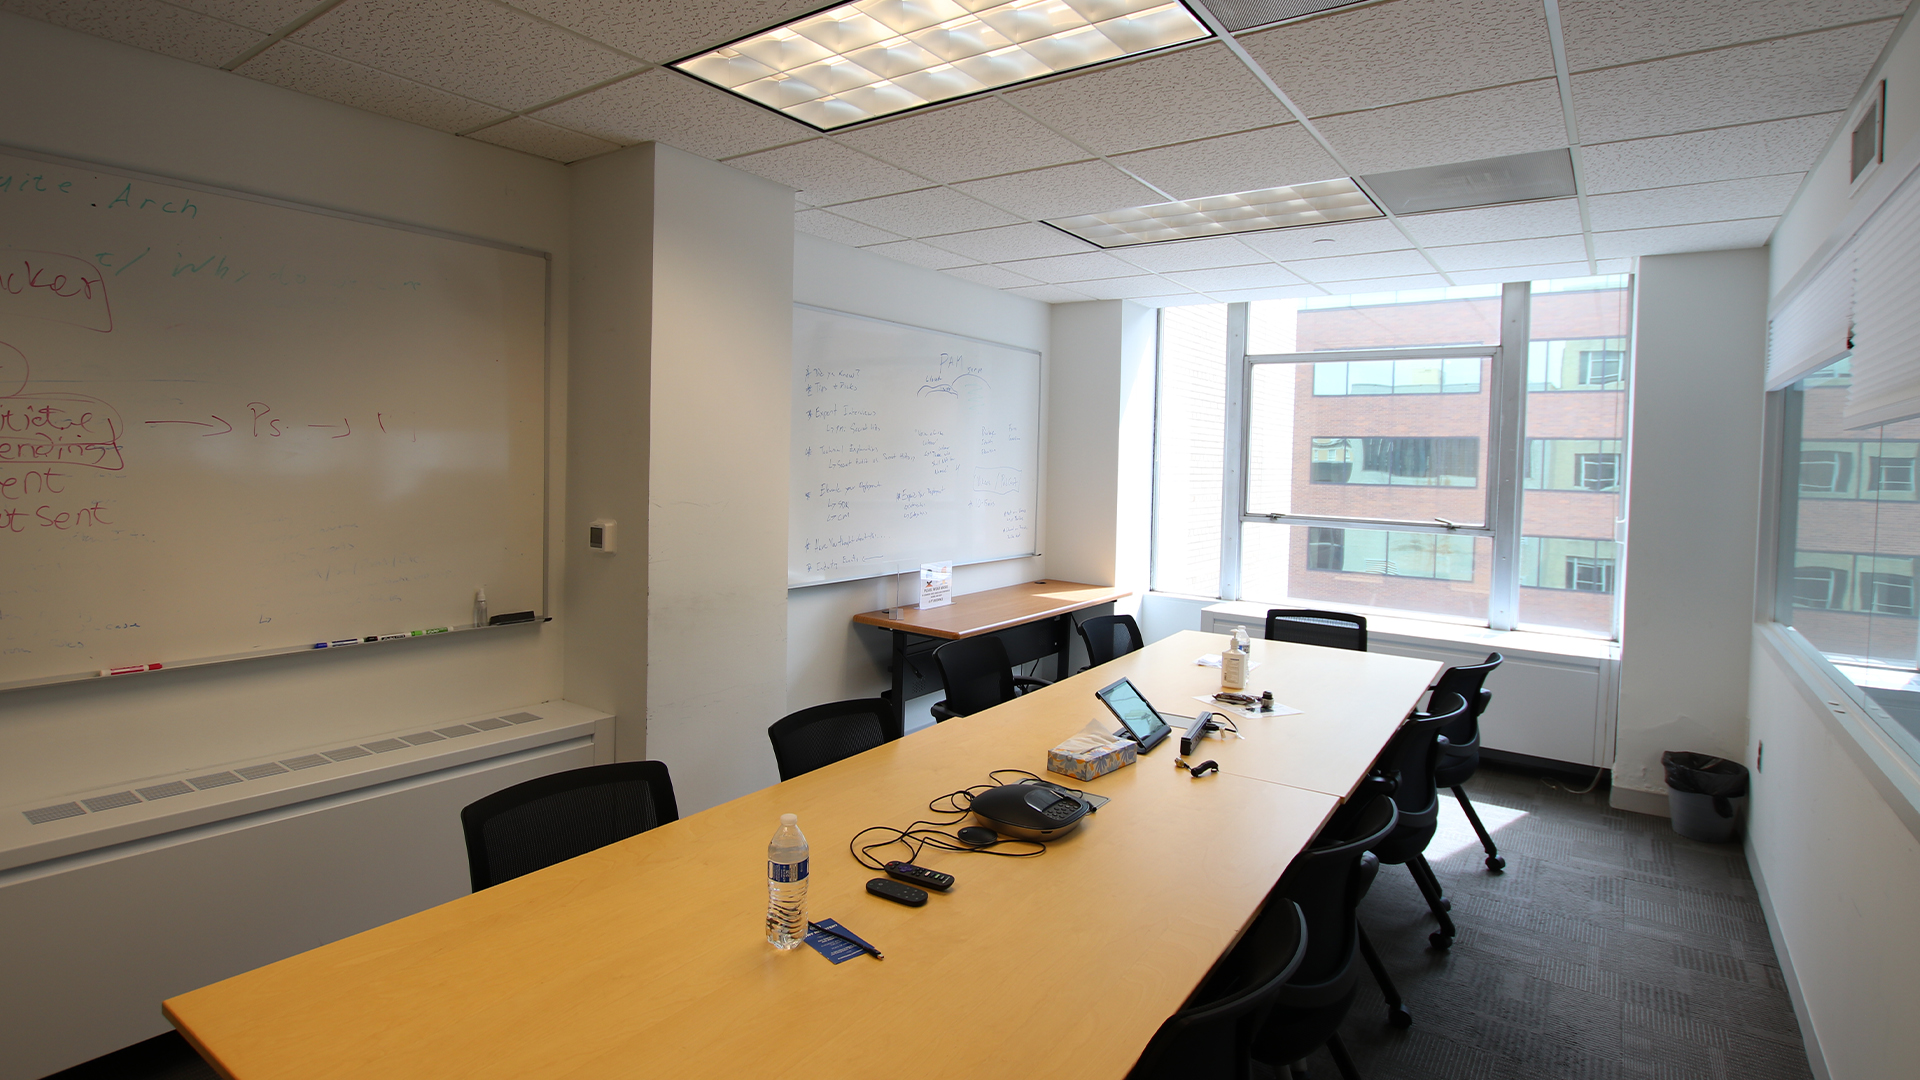 1101 17th St NW conf room